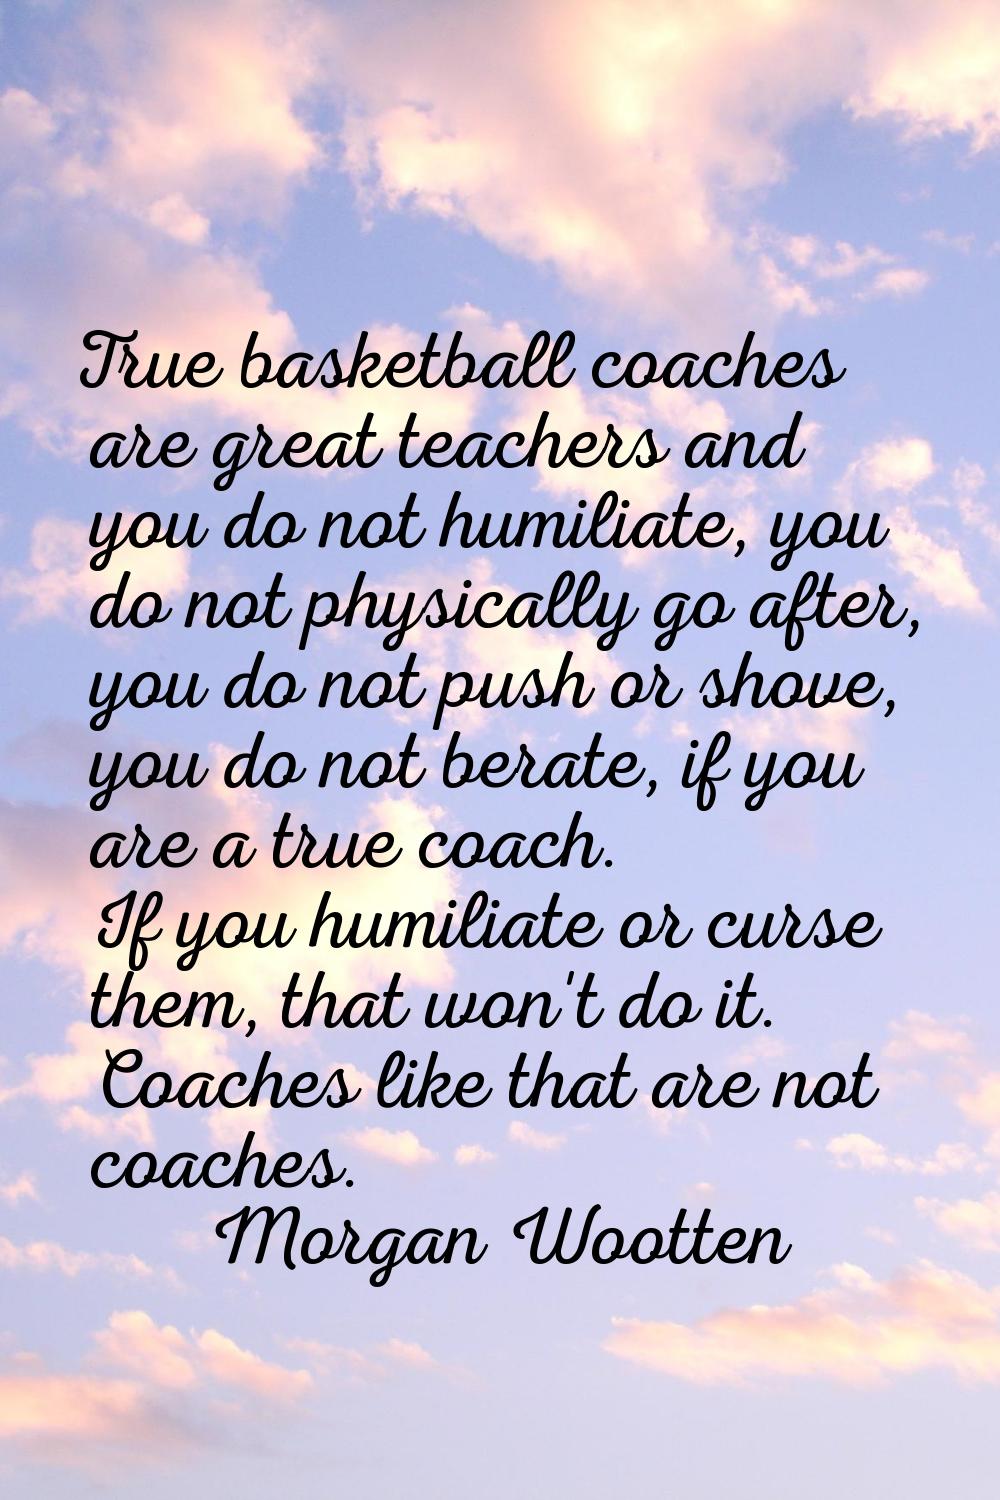 True basketball coaches are great teachers and you do not humiliate, you do not physically go after